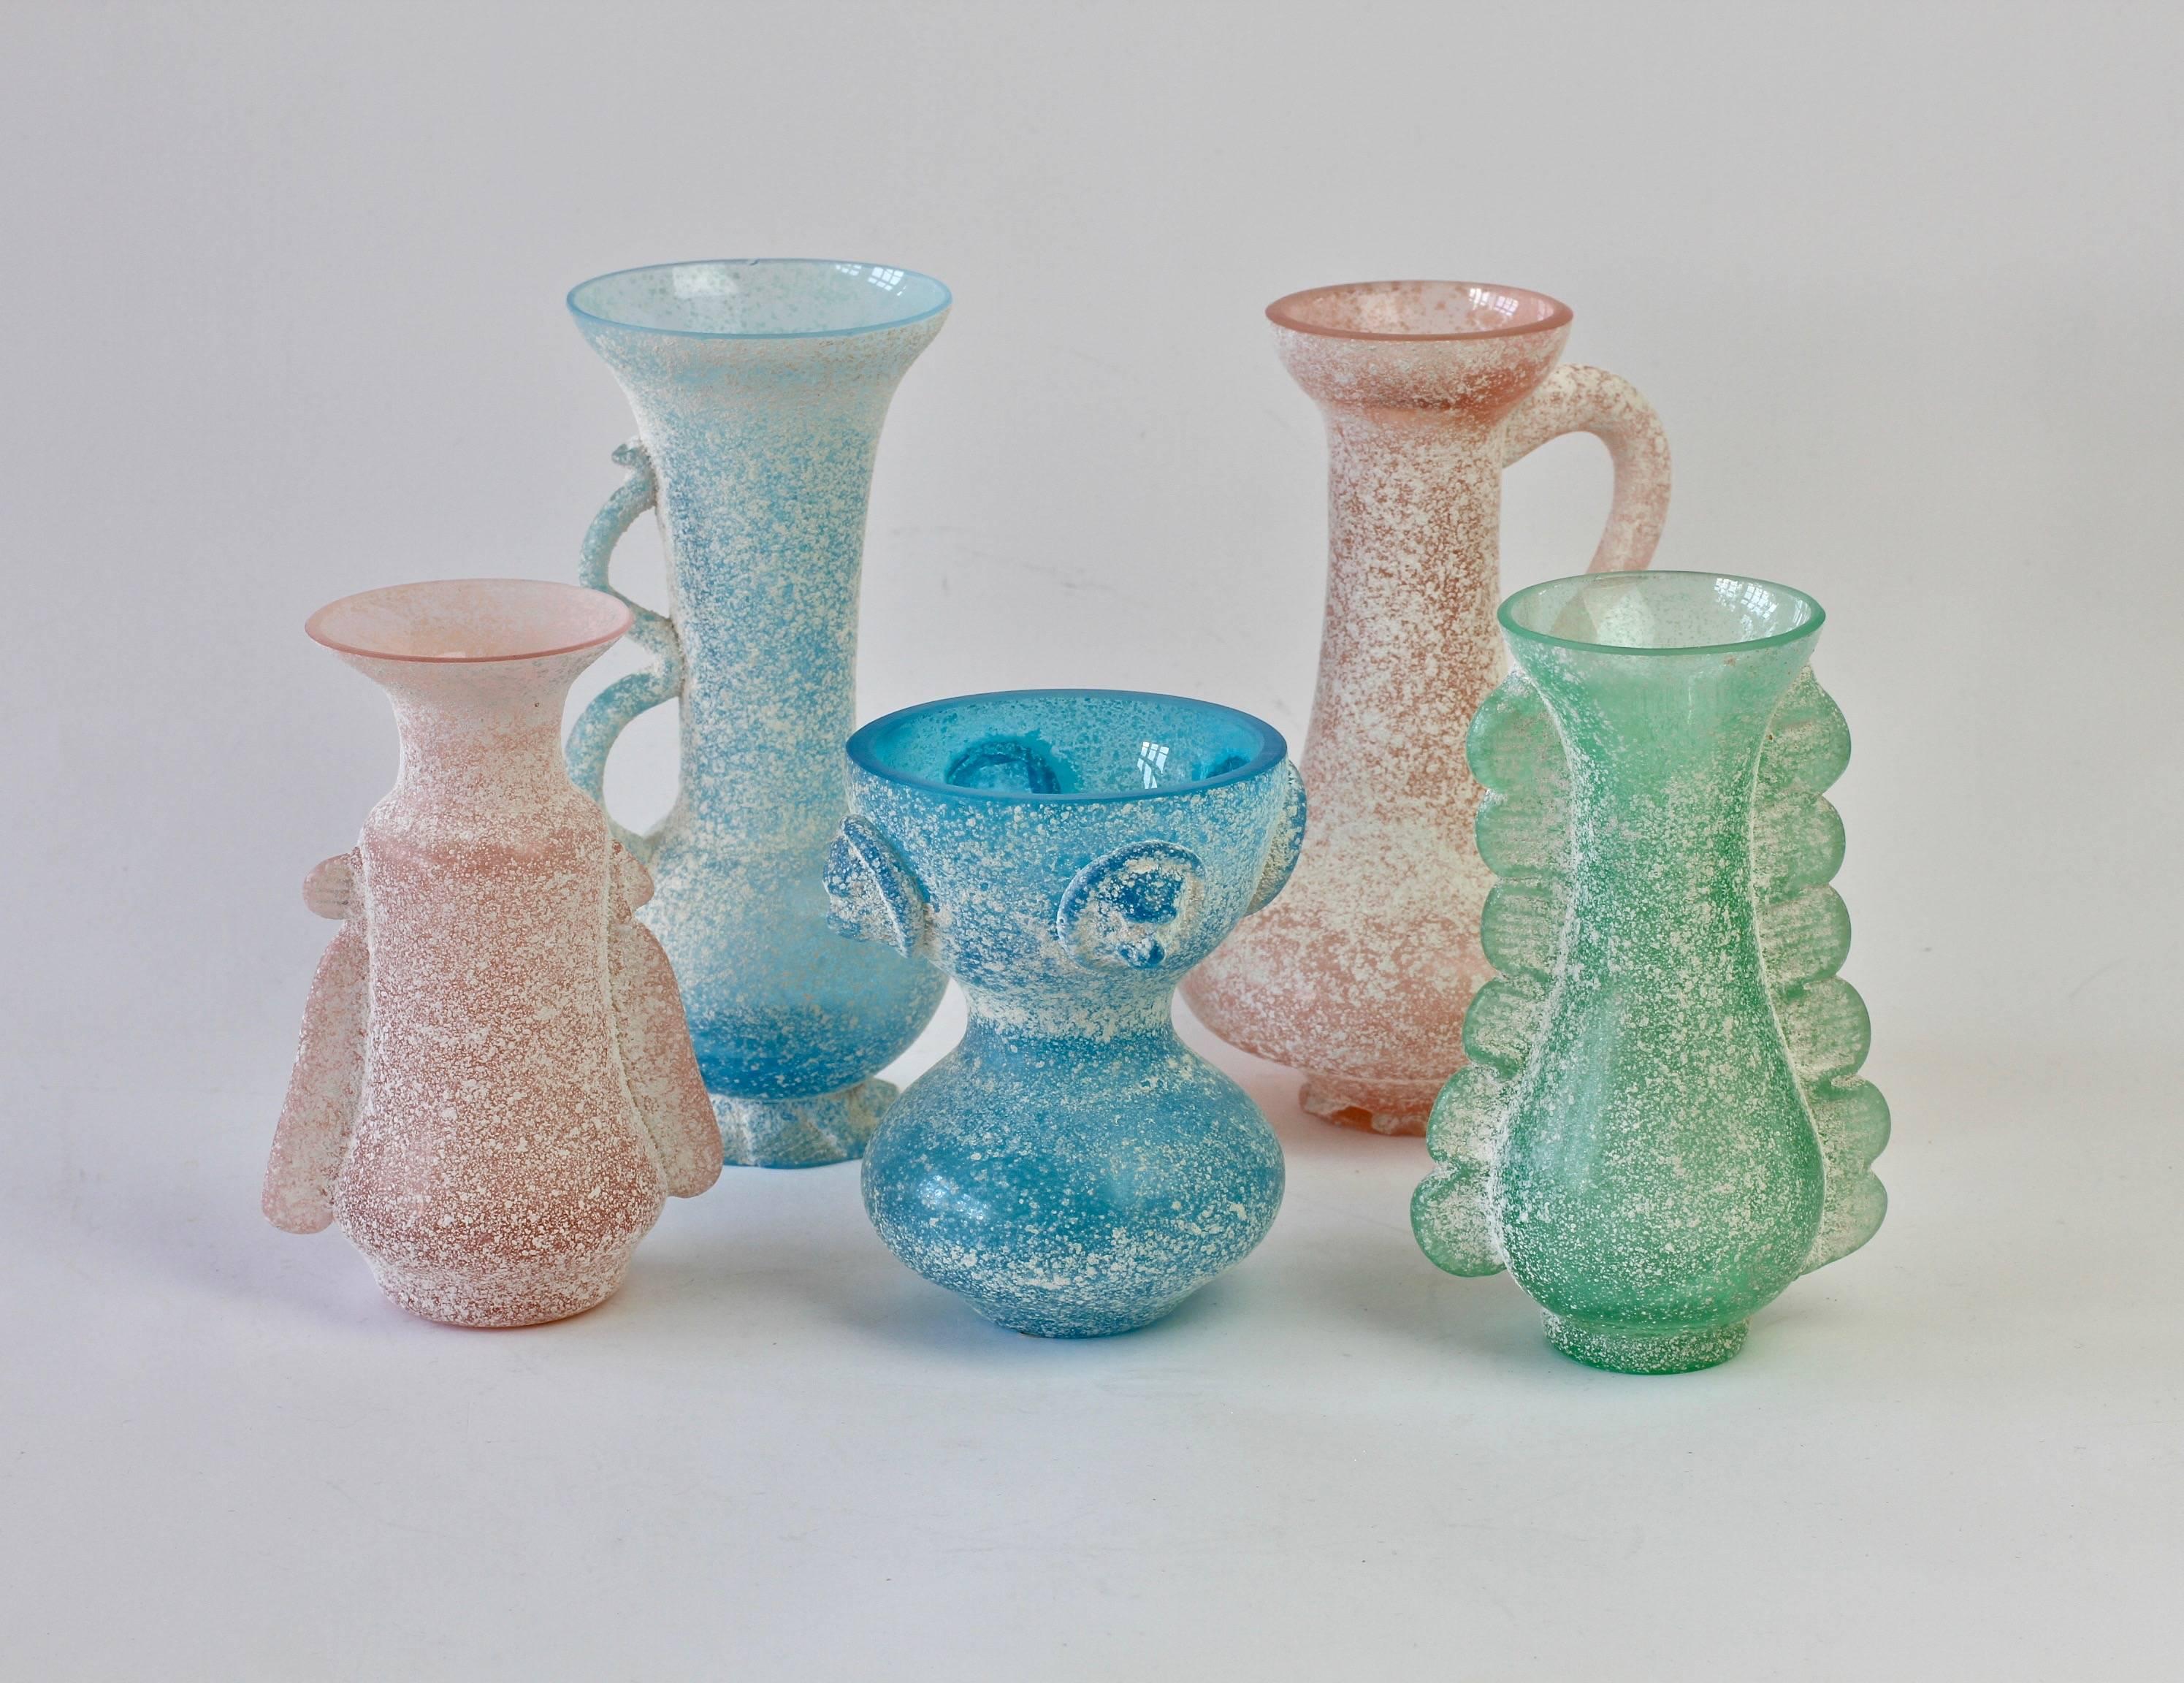 Wonderful collection / ensemble of 'a Scavo' colored / coloured glass vases and vessels, some of which have been attributed to Vittorio Rigatierri for Seguso Vetri d'Arte Murano, Italy, circa 1980s. Elegant in form and showing extraordinary